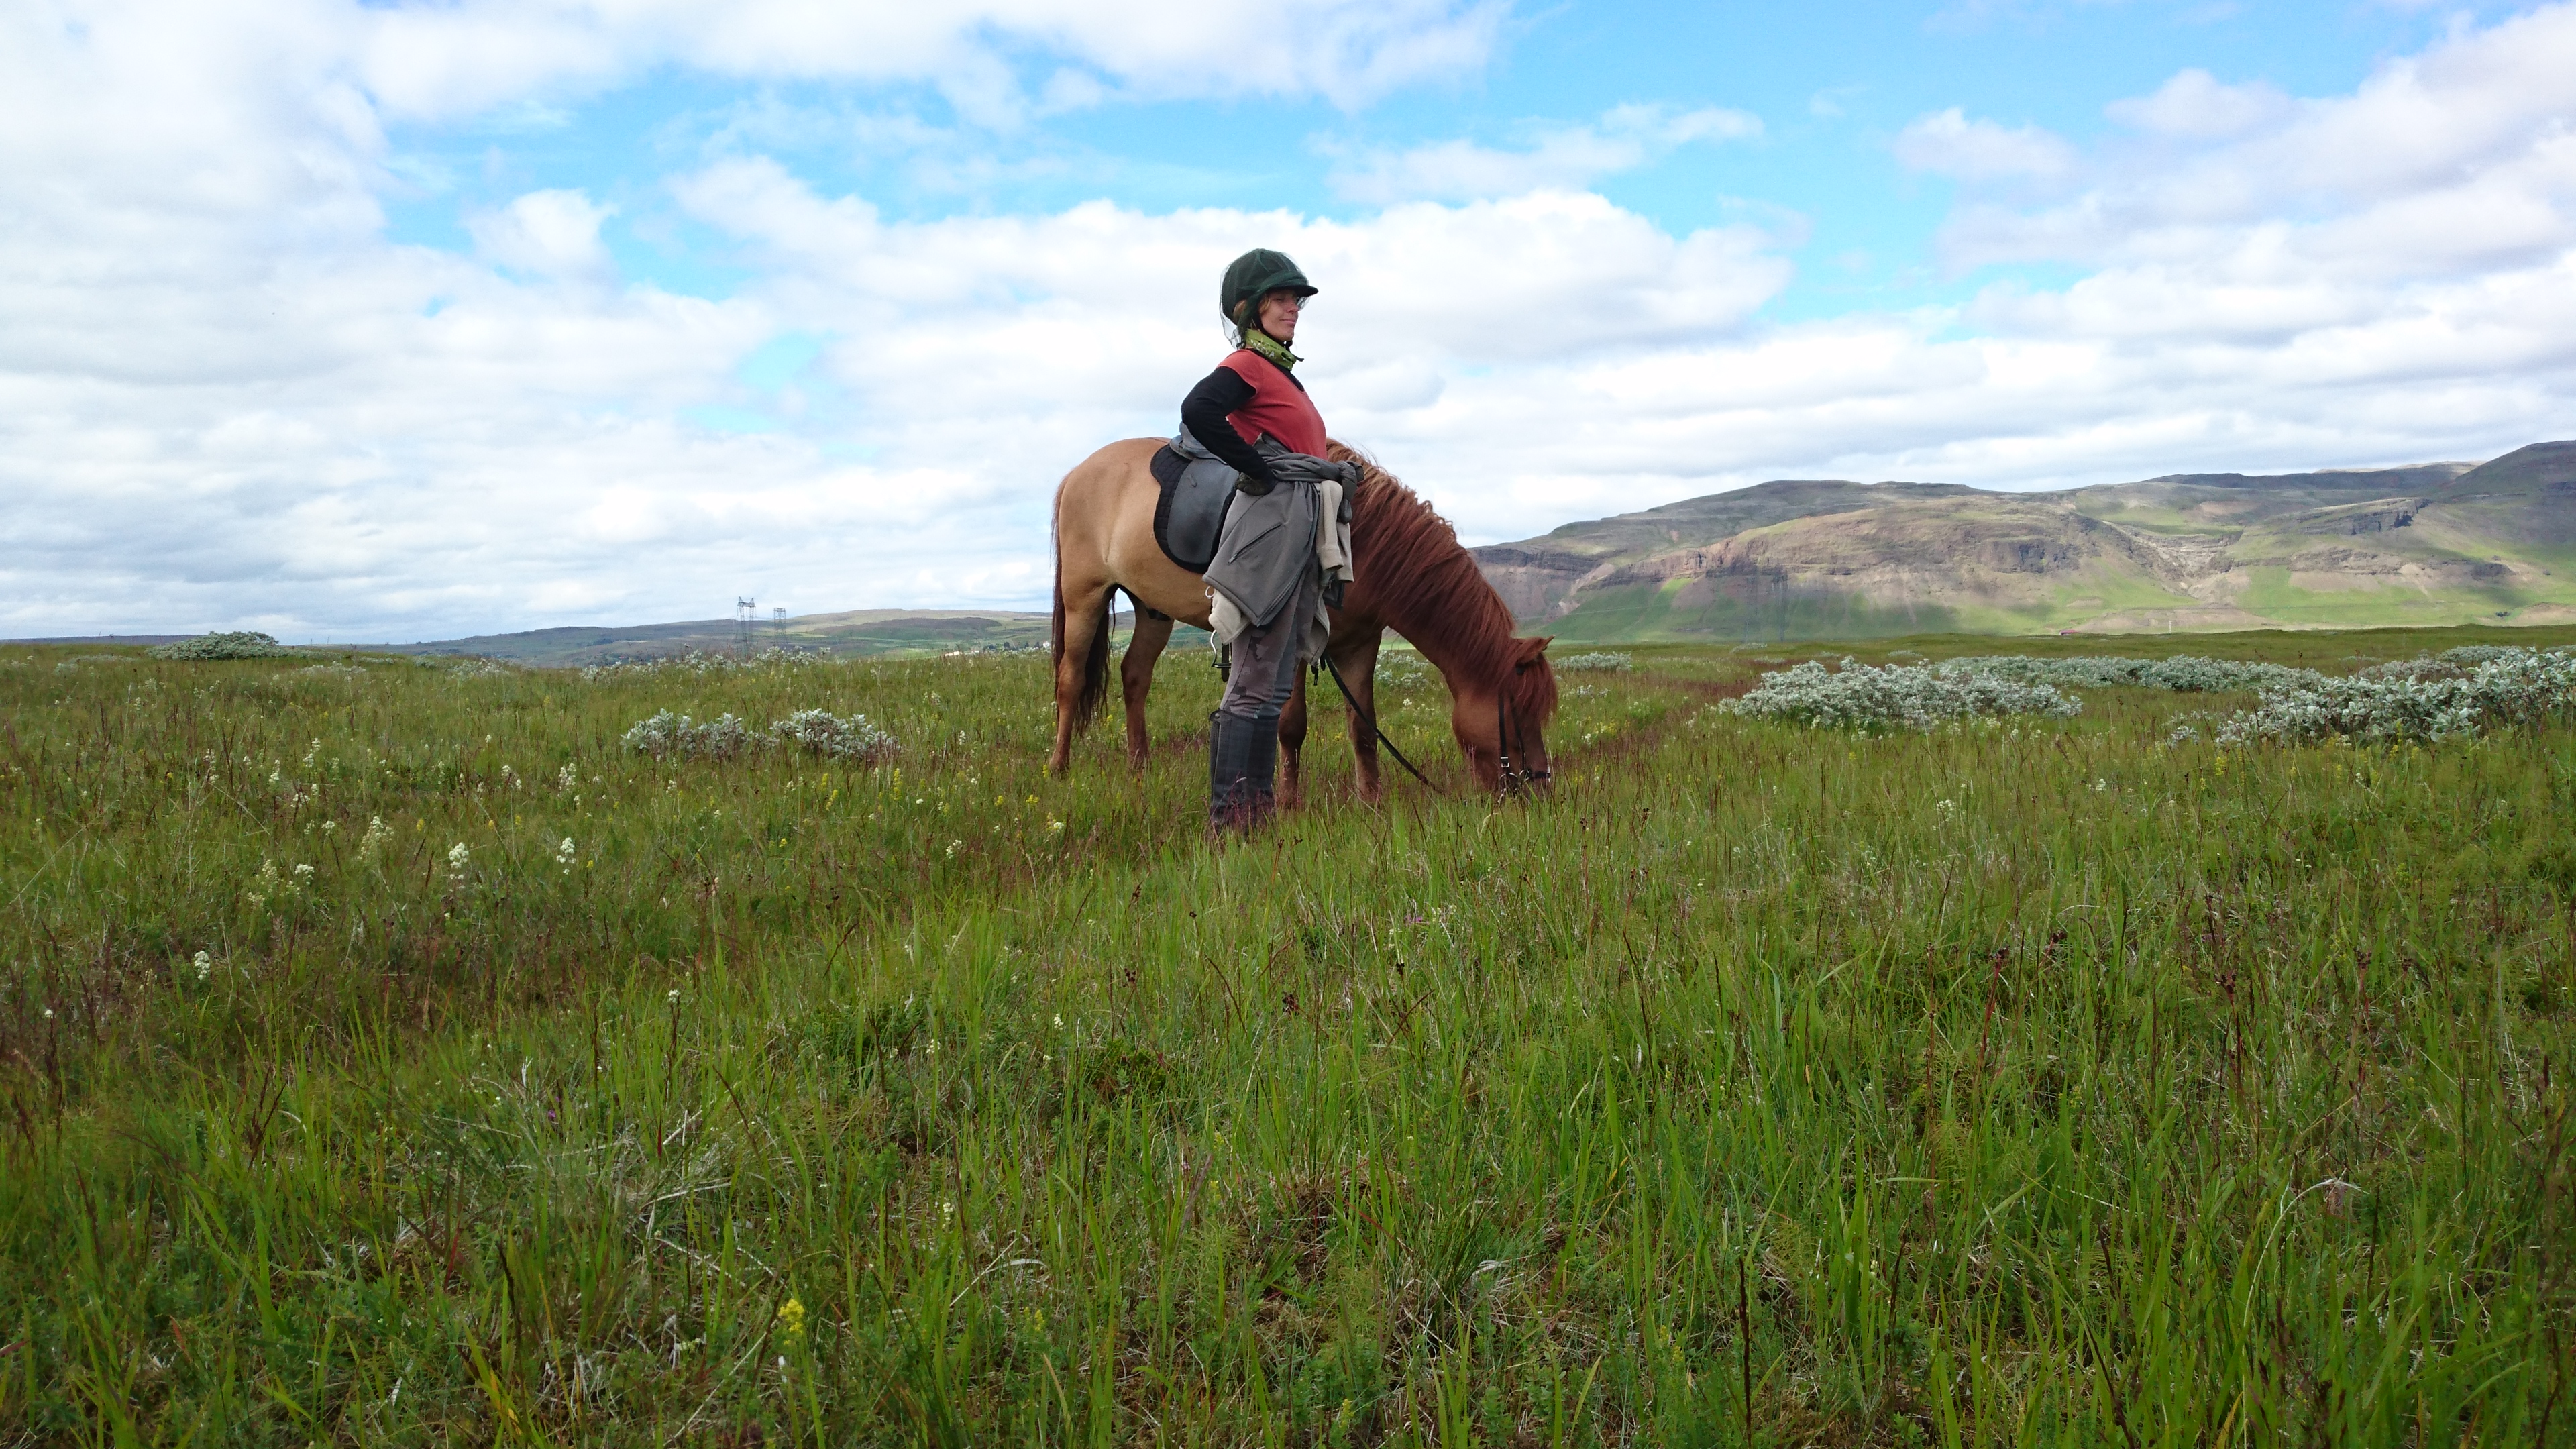 Horse Riding is one of the most popular tour activities in Iceland.